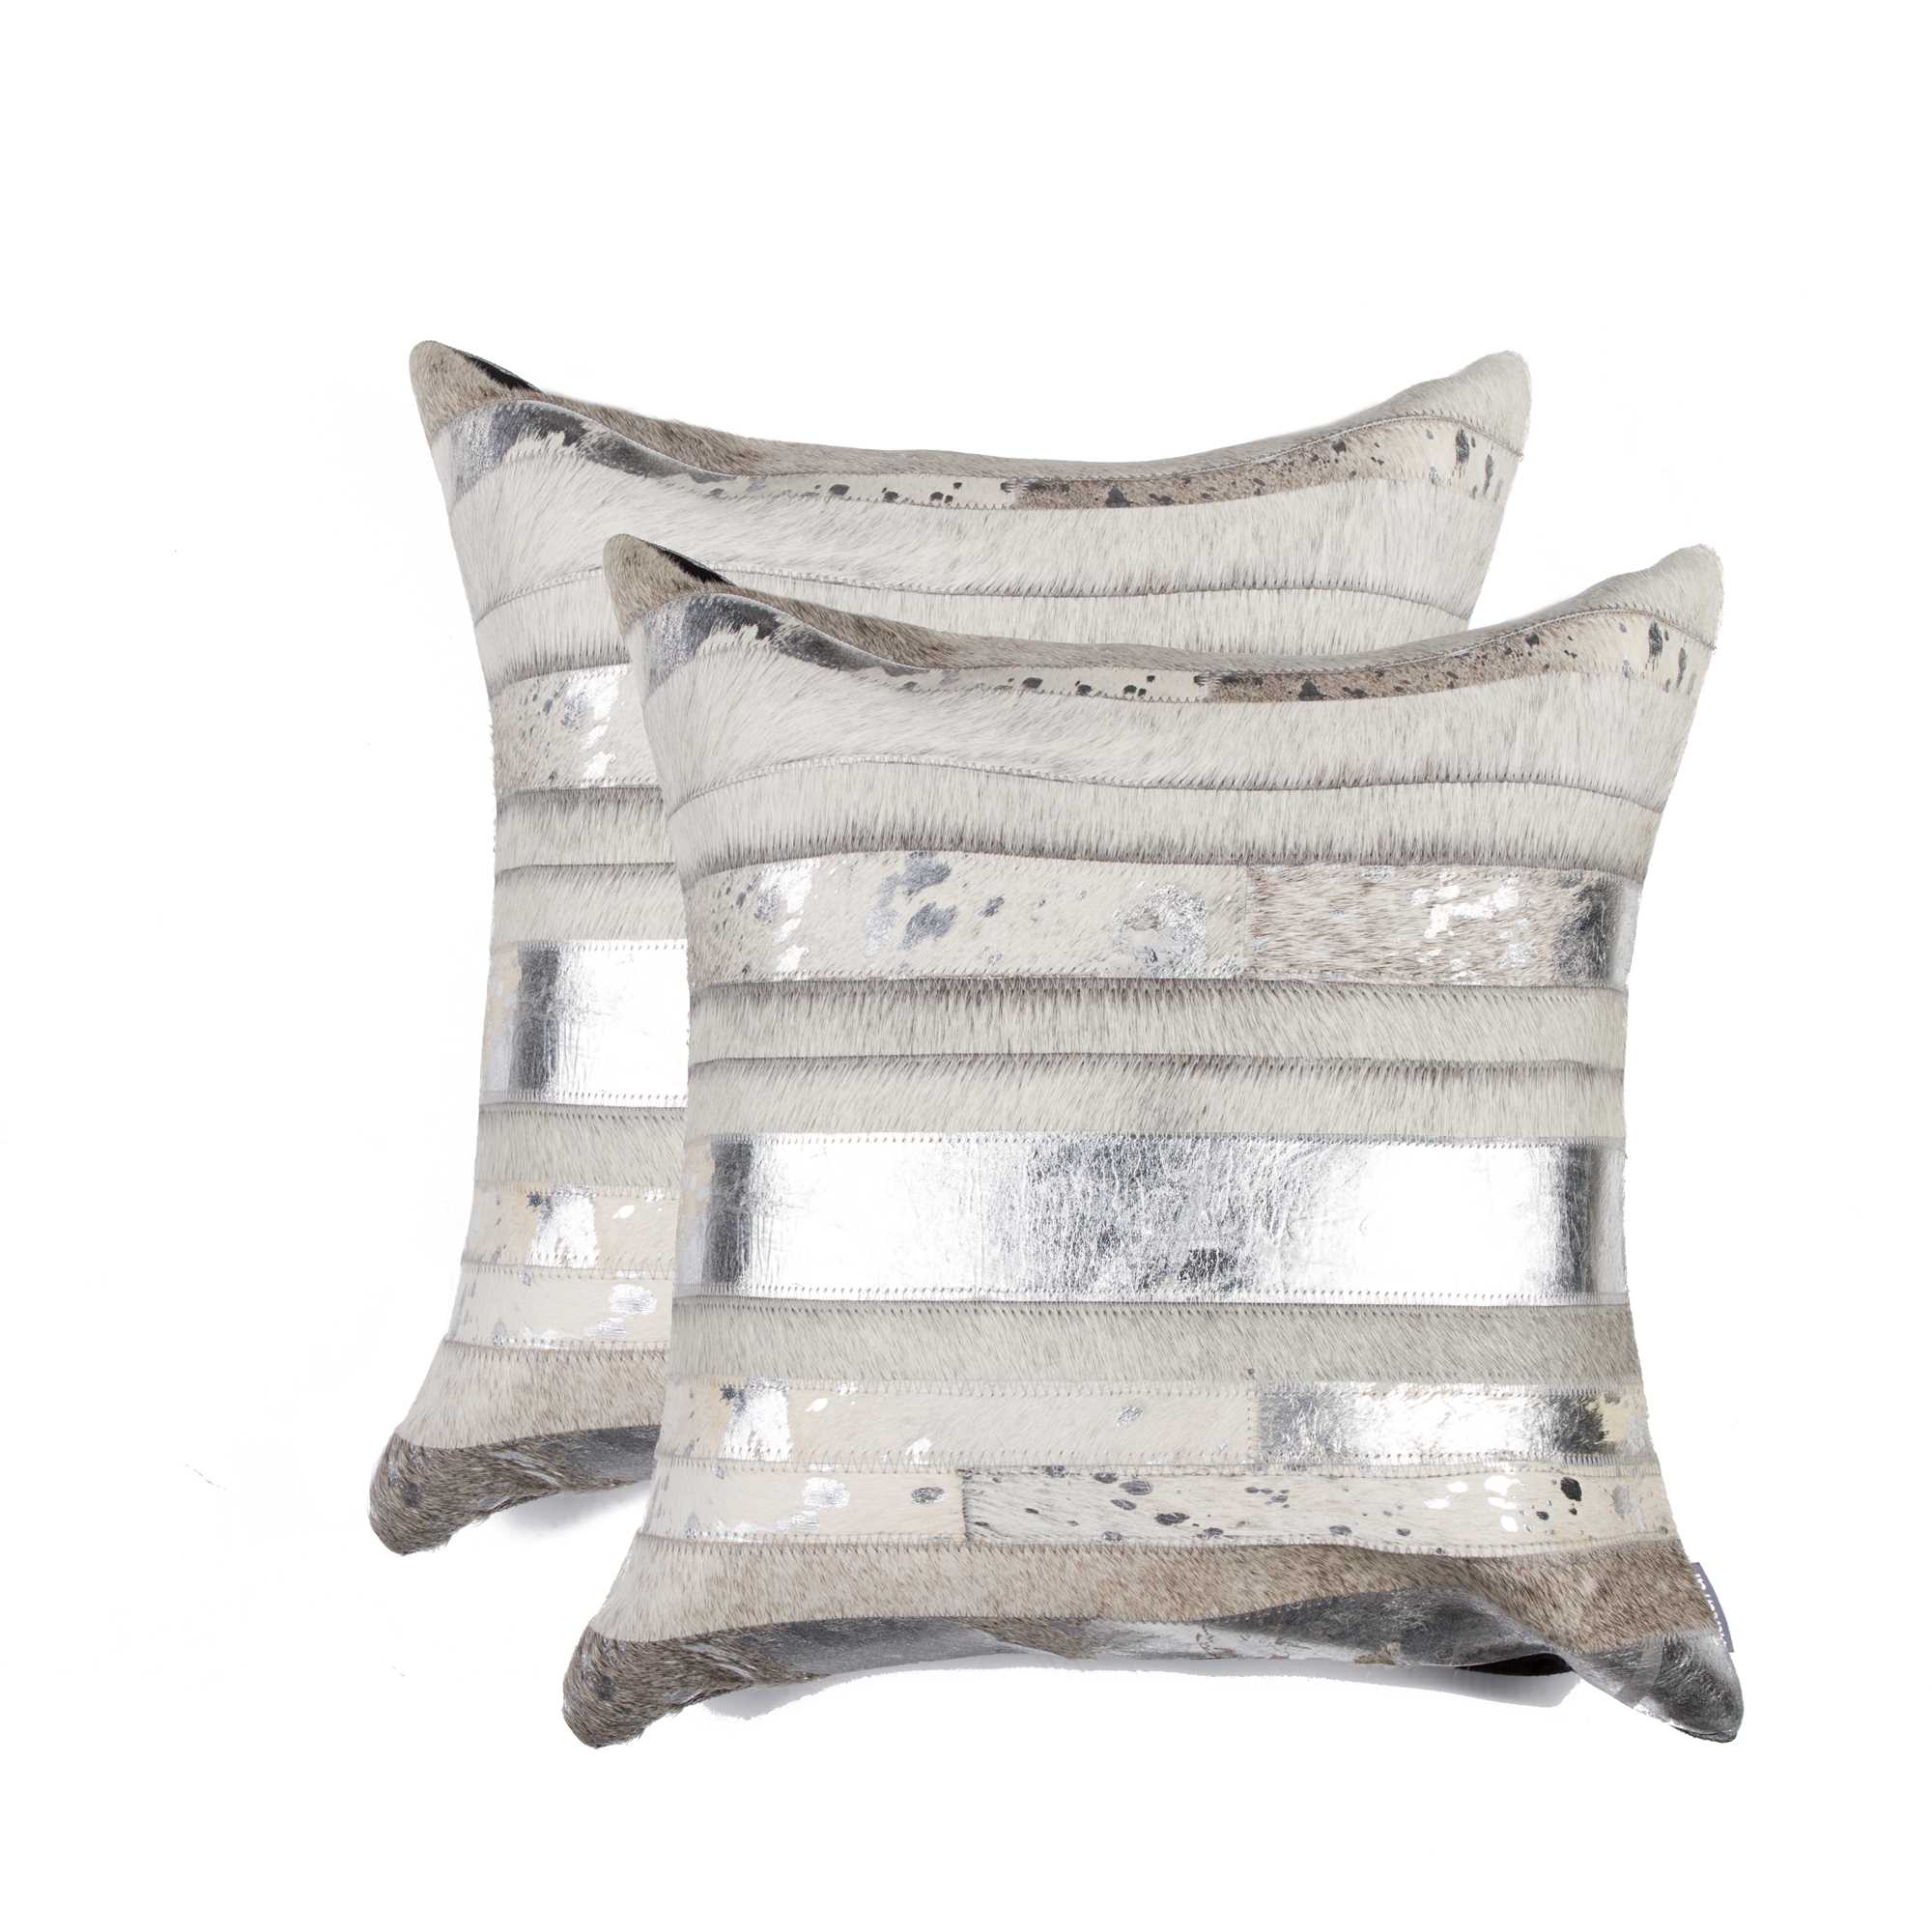 18" x 18" x 5" Silver And Gray - Pillow 2-Pack